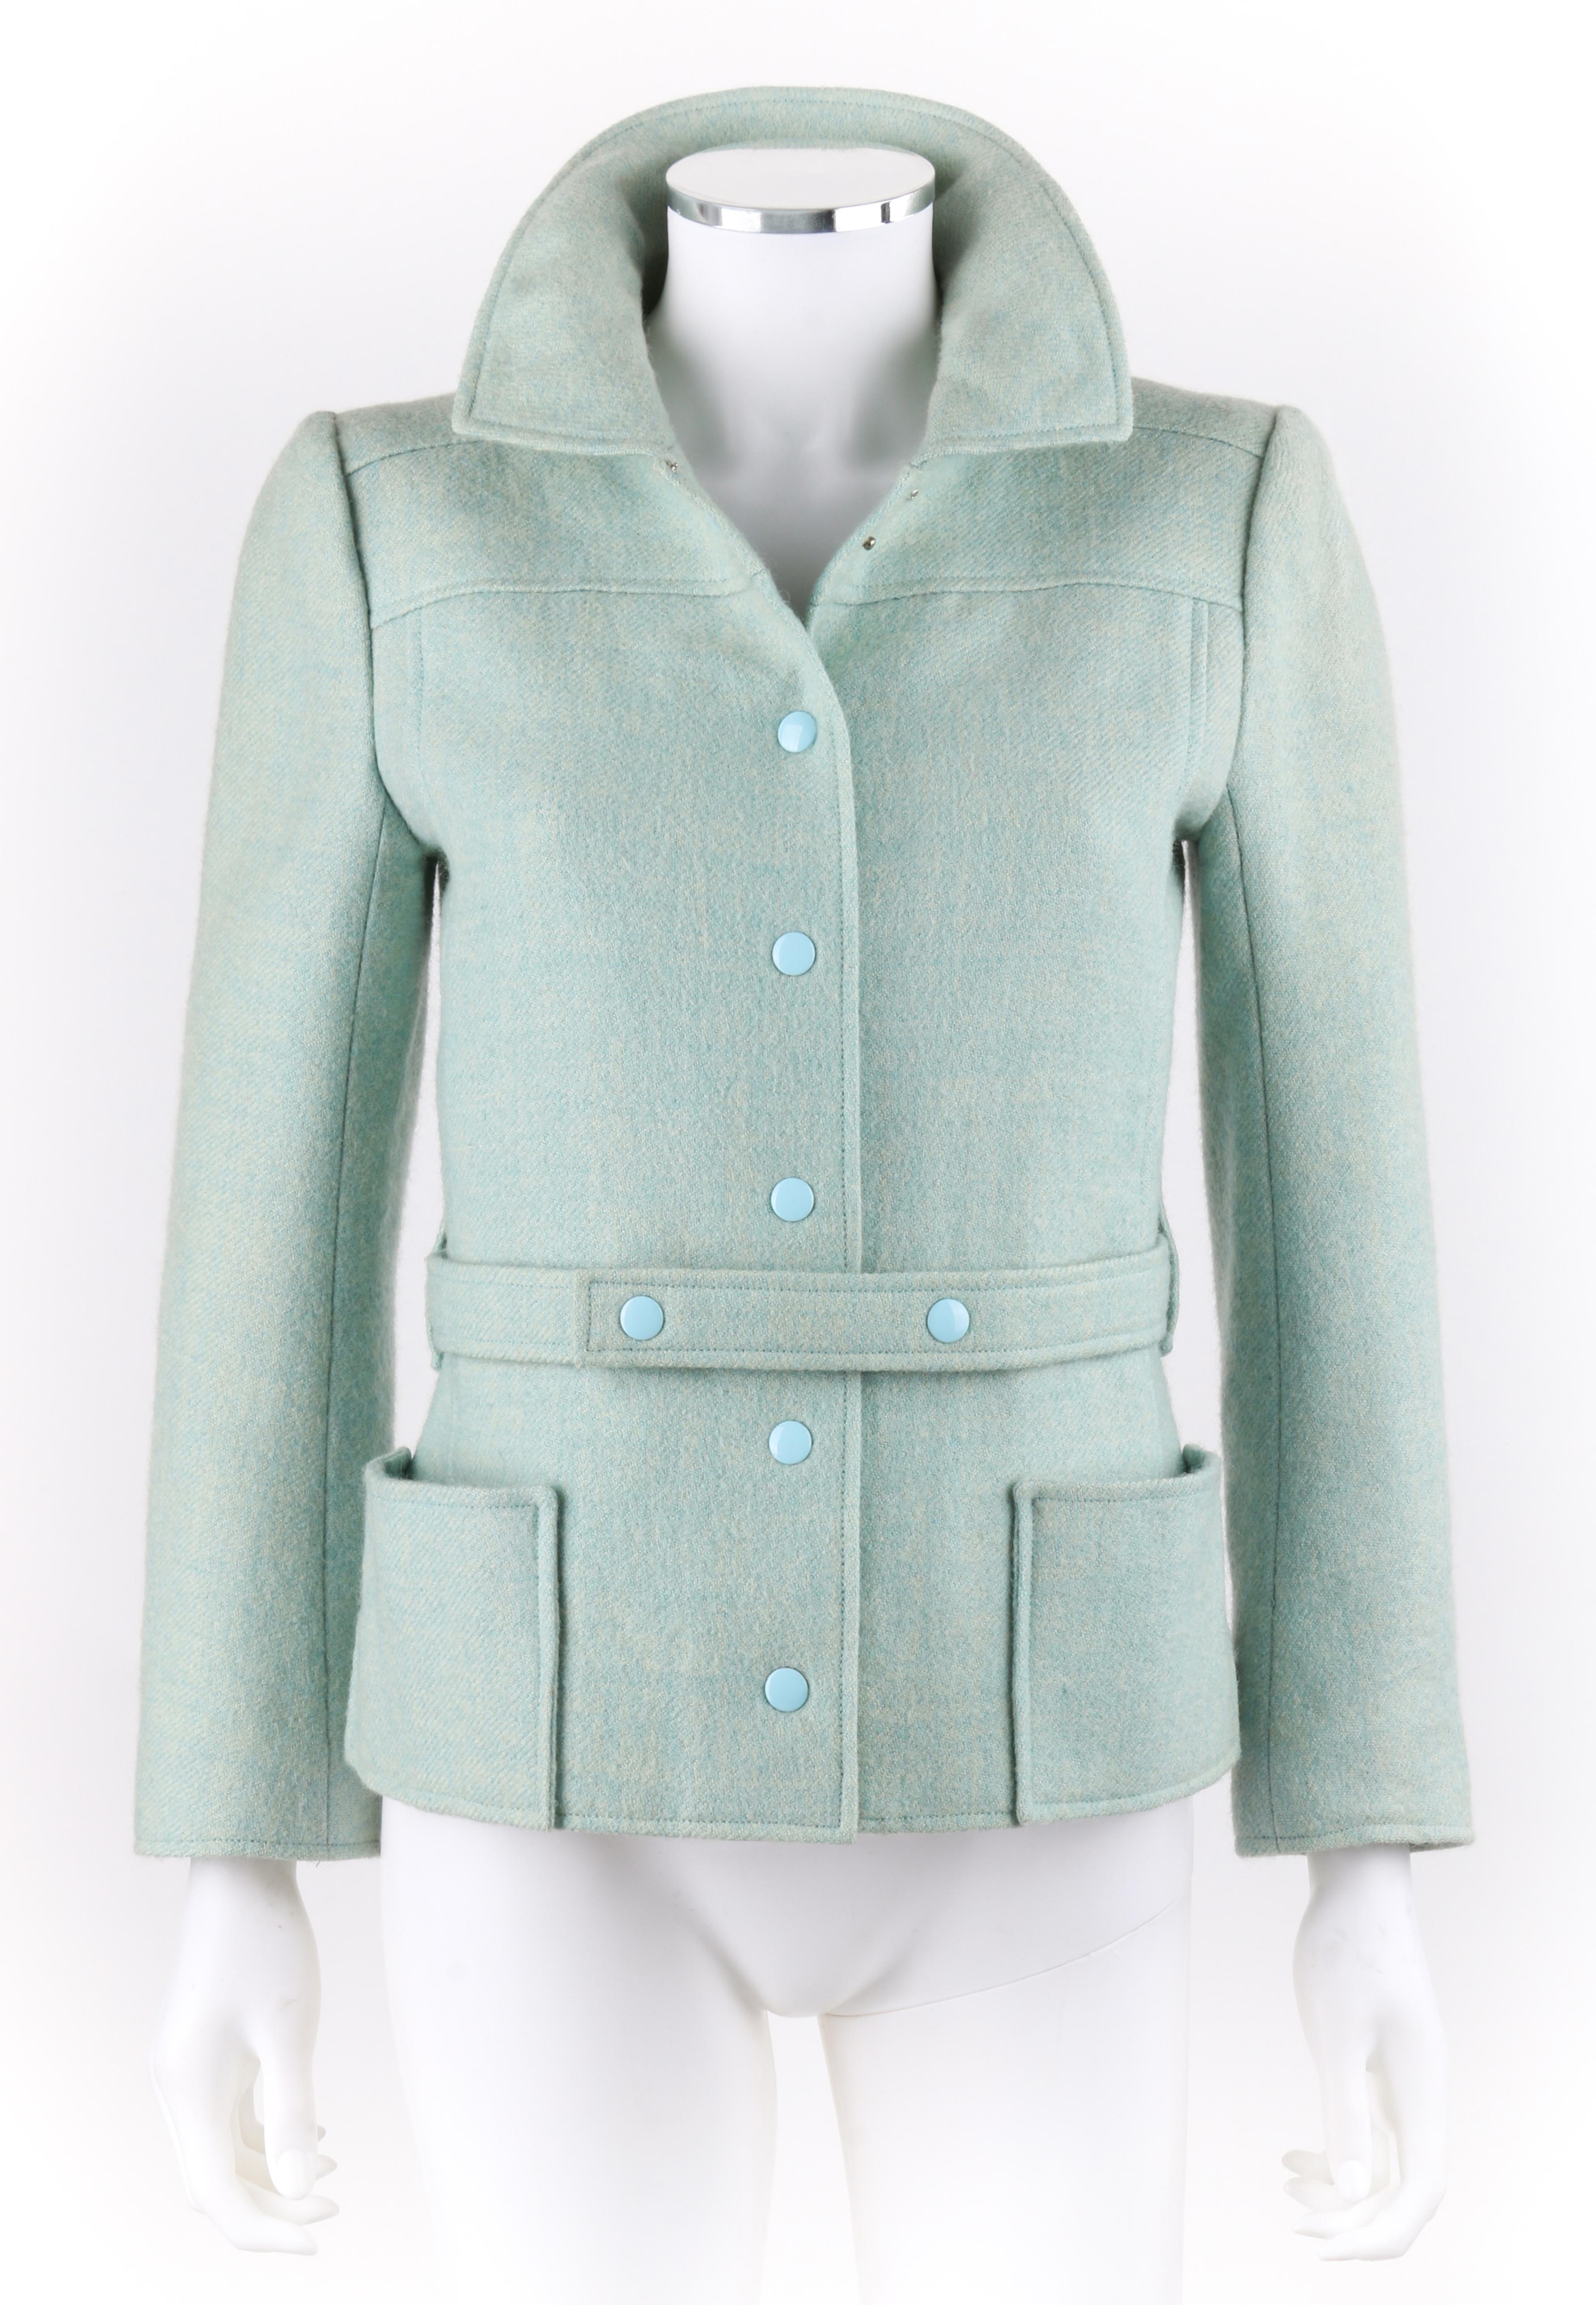 DESCRIPTION: COURREGES Hyperbole c.1970's Sky / Mint Blue Snap Front Belted Jacket
 
Circa: c.1970’s
Label(s): Courreges Hyperbole 
Designer: Andre Courreges  
Style: Jacket
Color(s): Mint blue (shades of blue and off white)
Lined: Yes
Marked Fabric